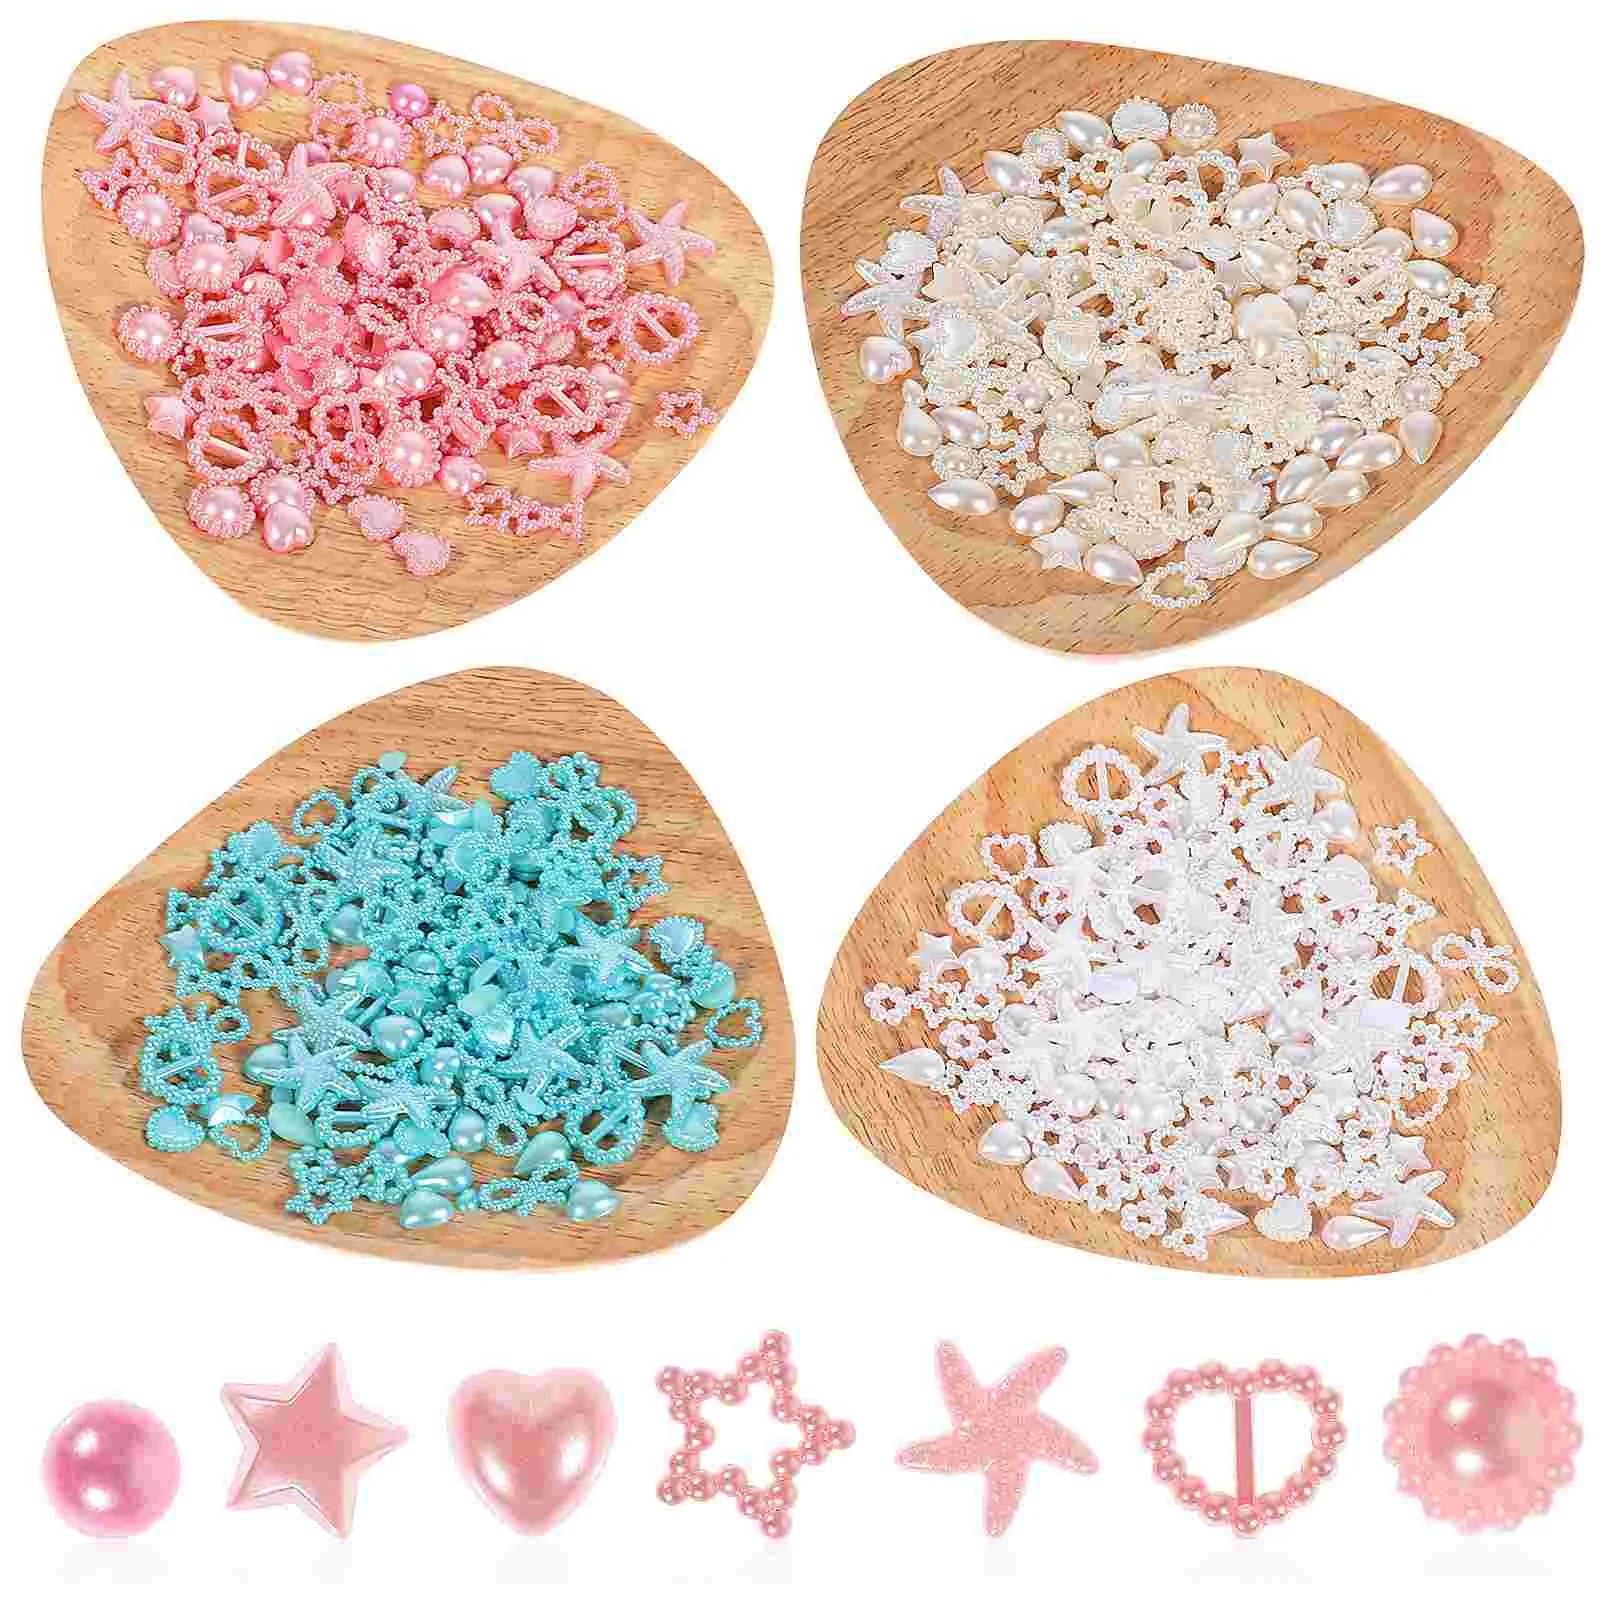 4 Bags Handmade Jewelry Mixed Styles Mini Bowationationation Material Embellishments DIY Crafts Accessories